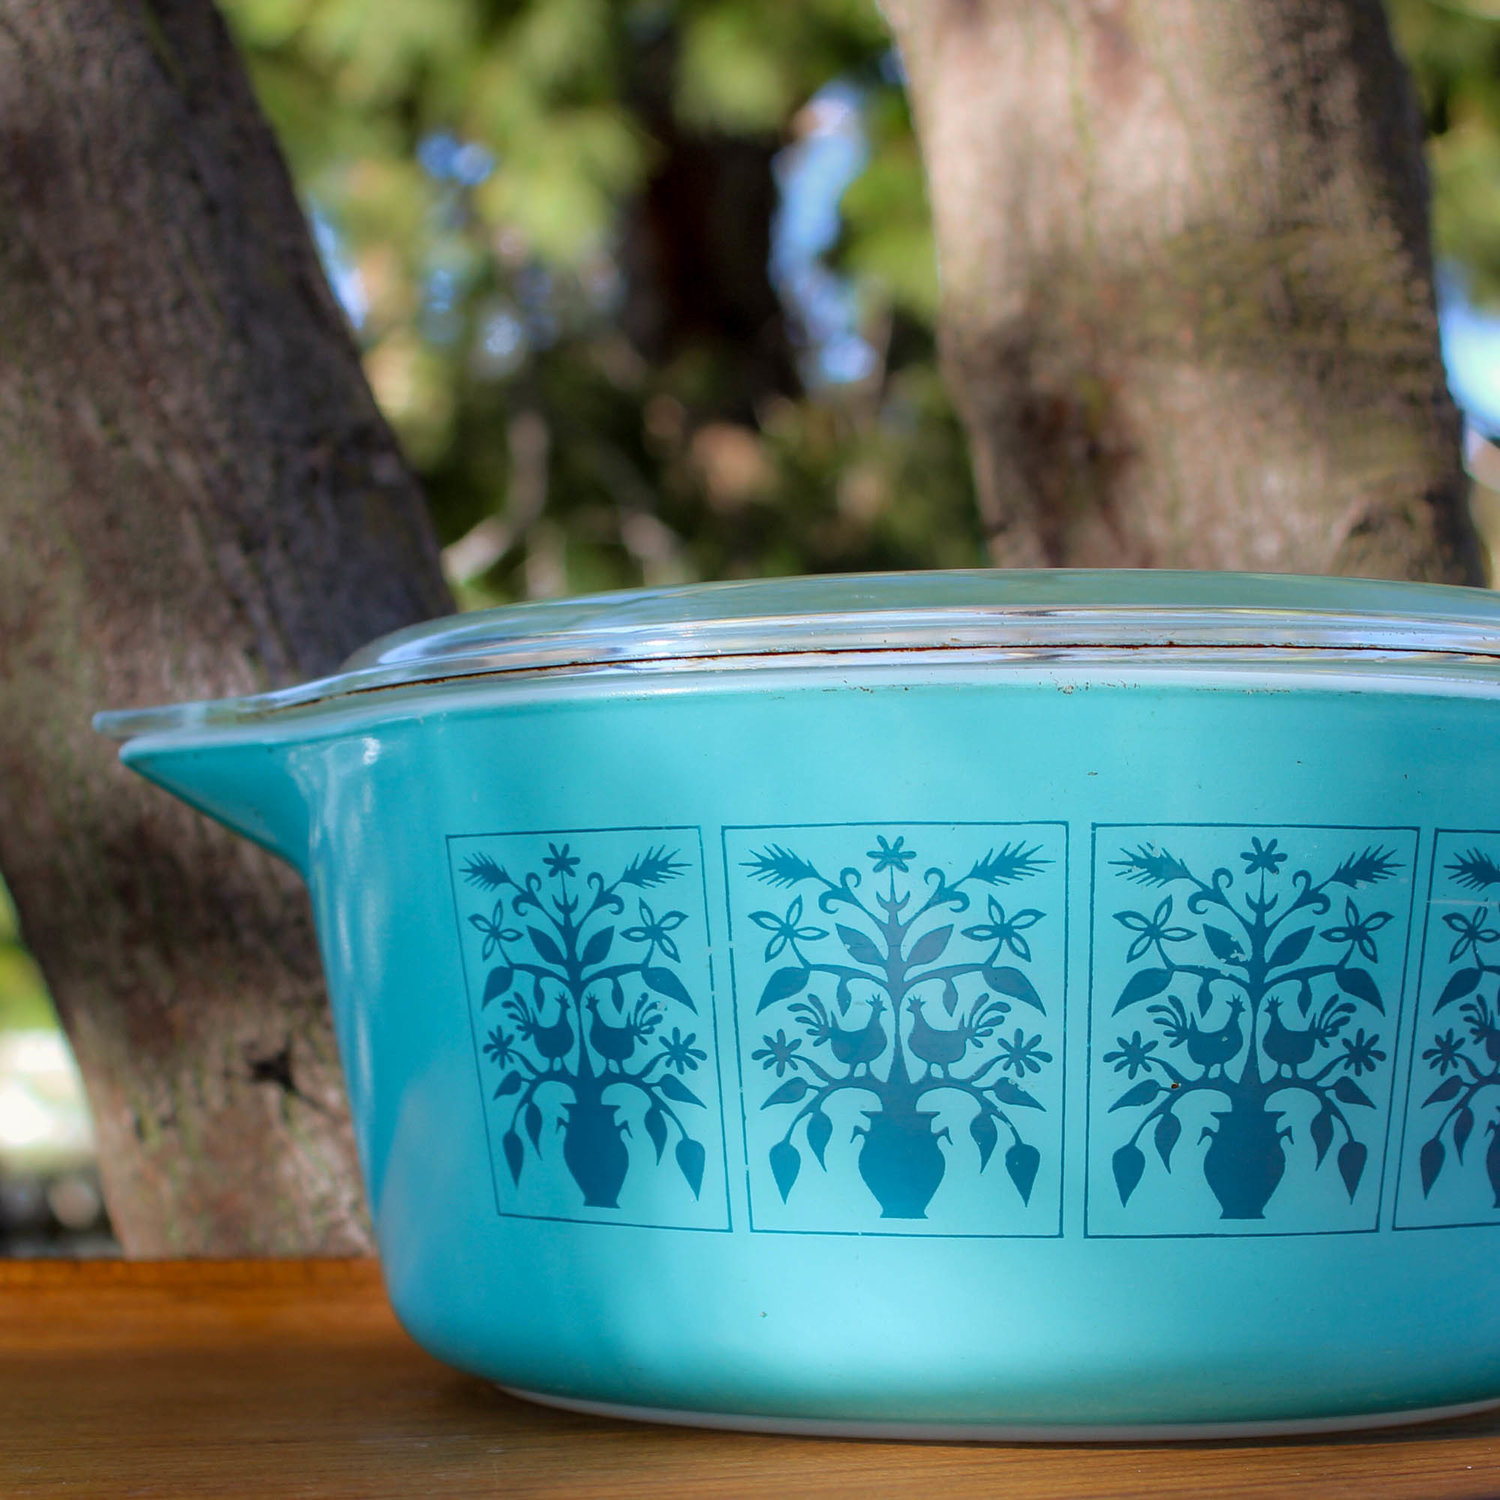 Does Your Family’s Century-Old Pyrex Still Rule The Kitchen?